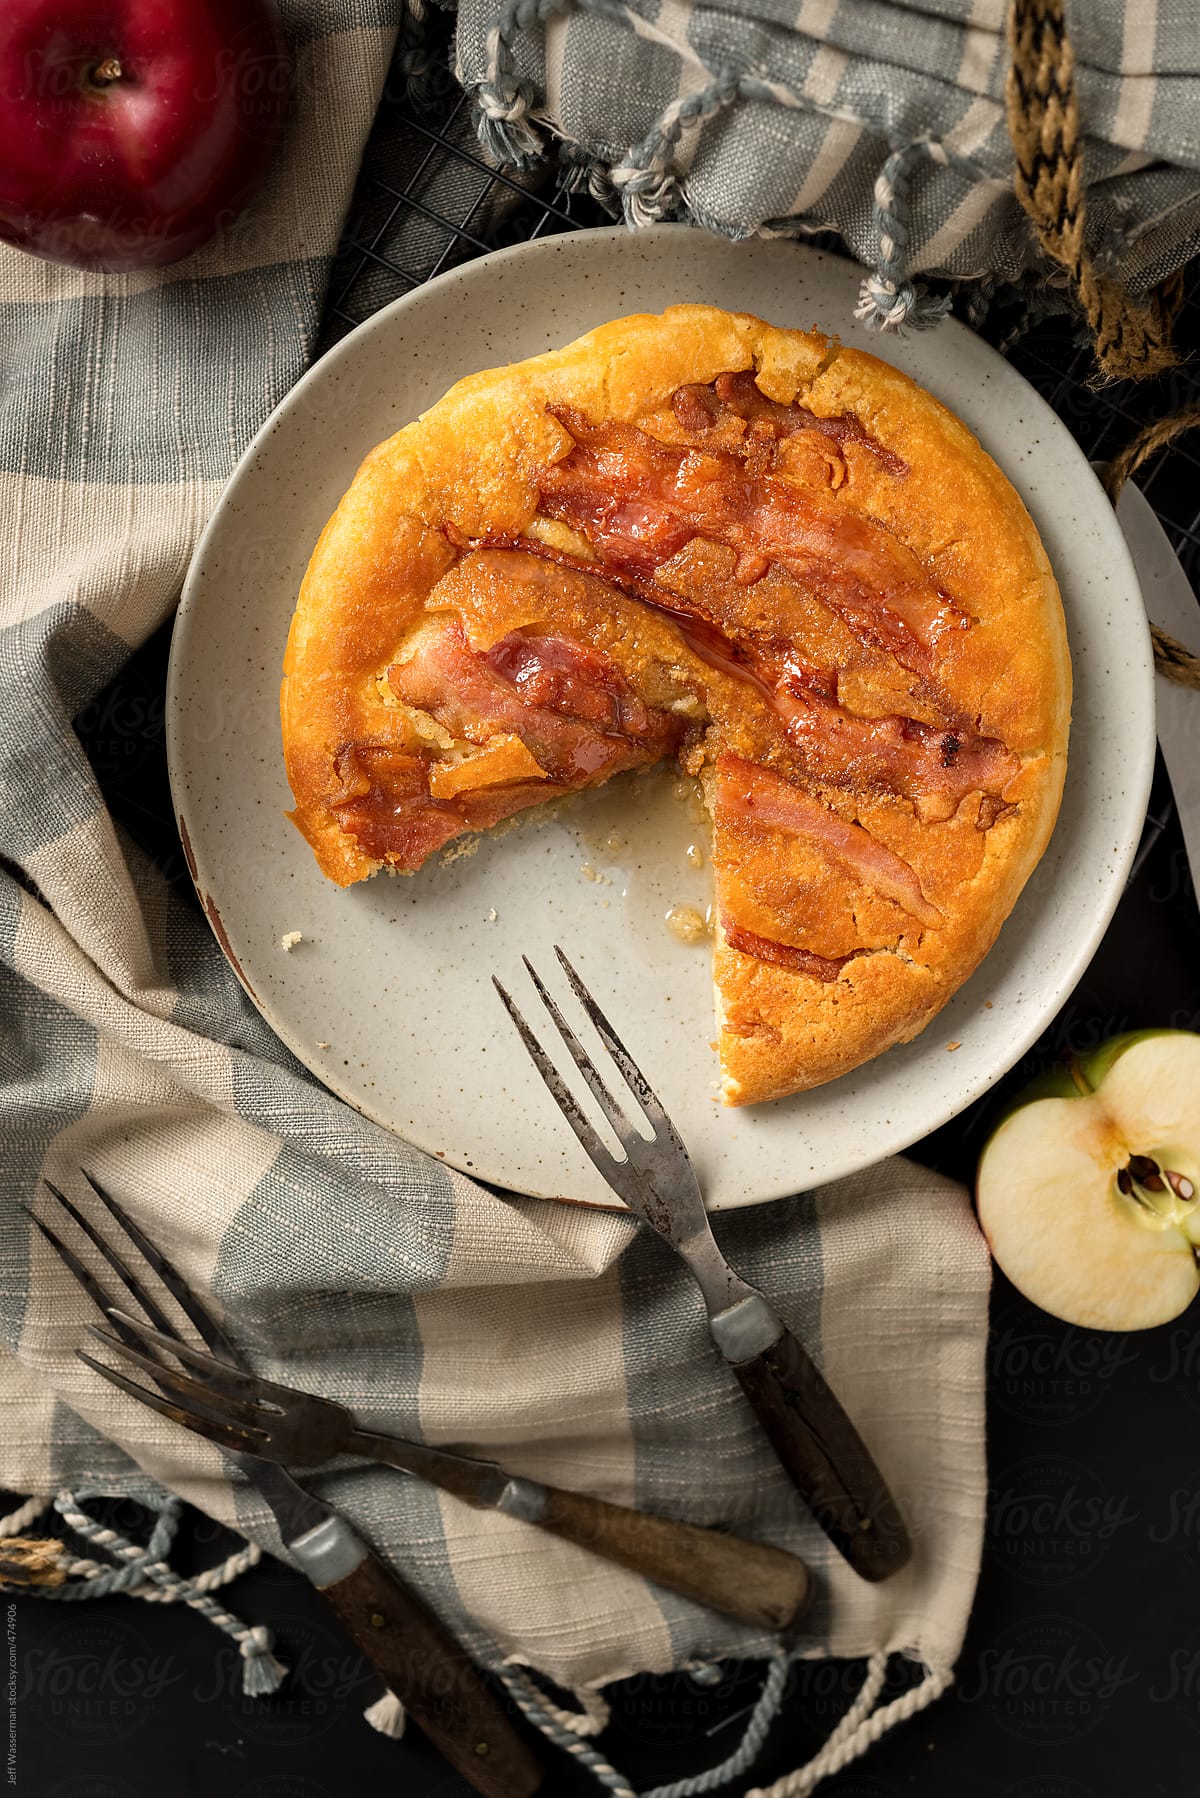 Decadent Baked Apple and Bacon Pancake